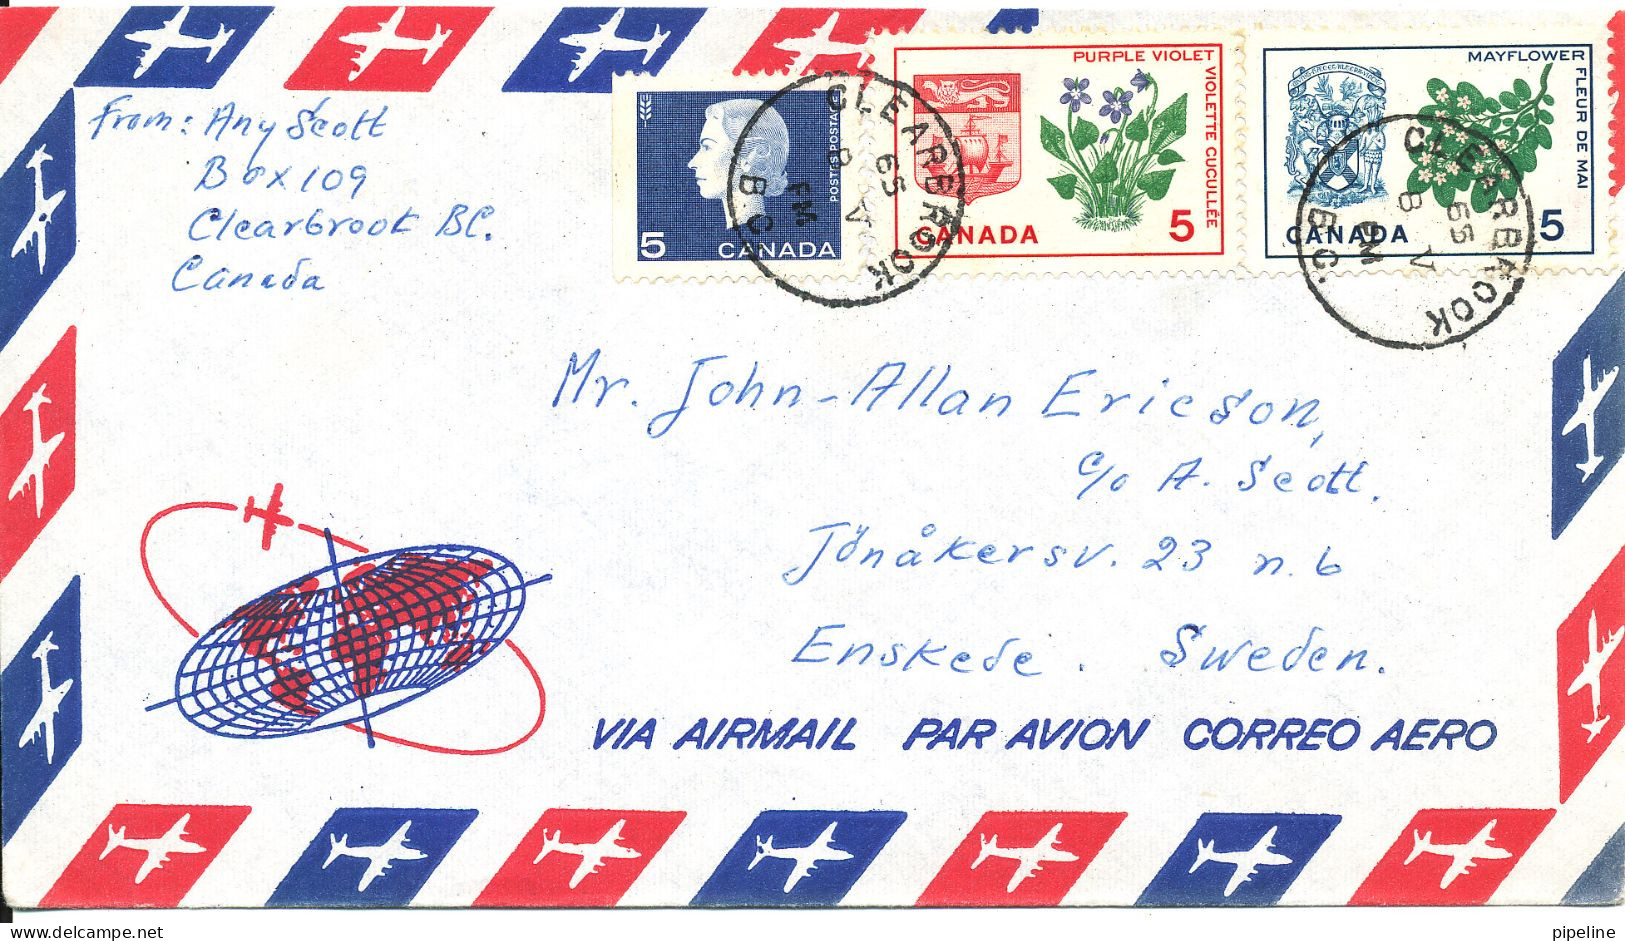 Canada Air Mail Cover Sent To Sweden 8-5-1965 - Posta Aerea